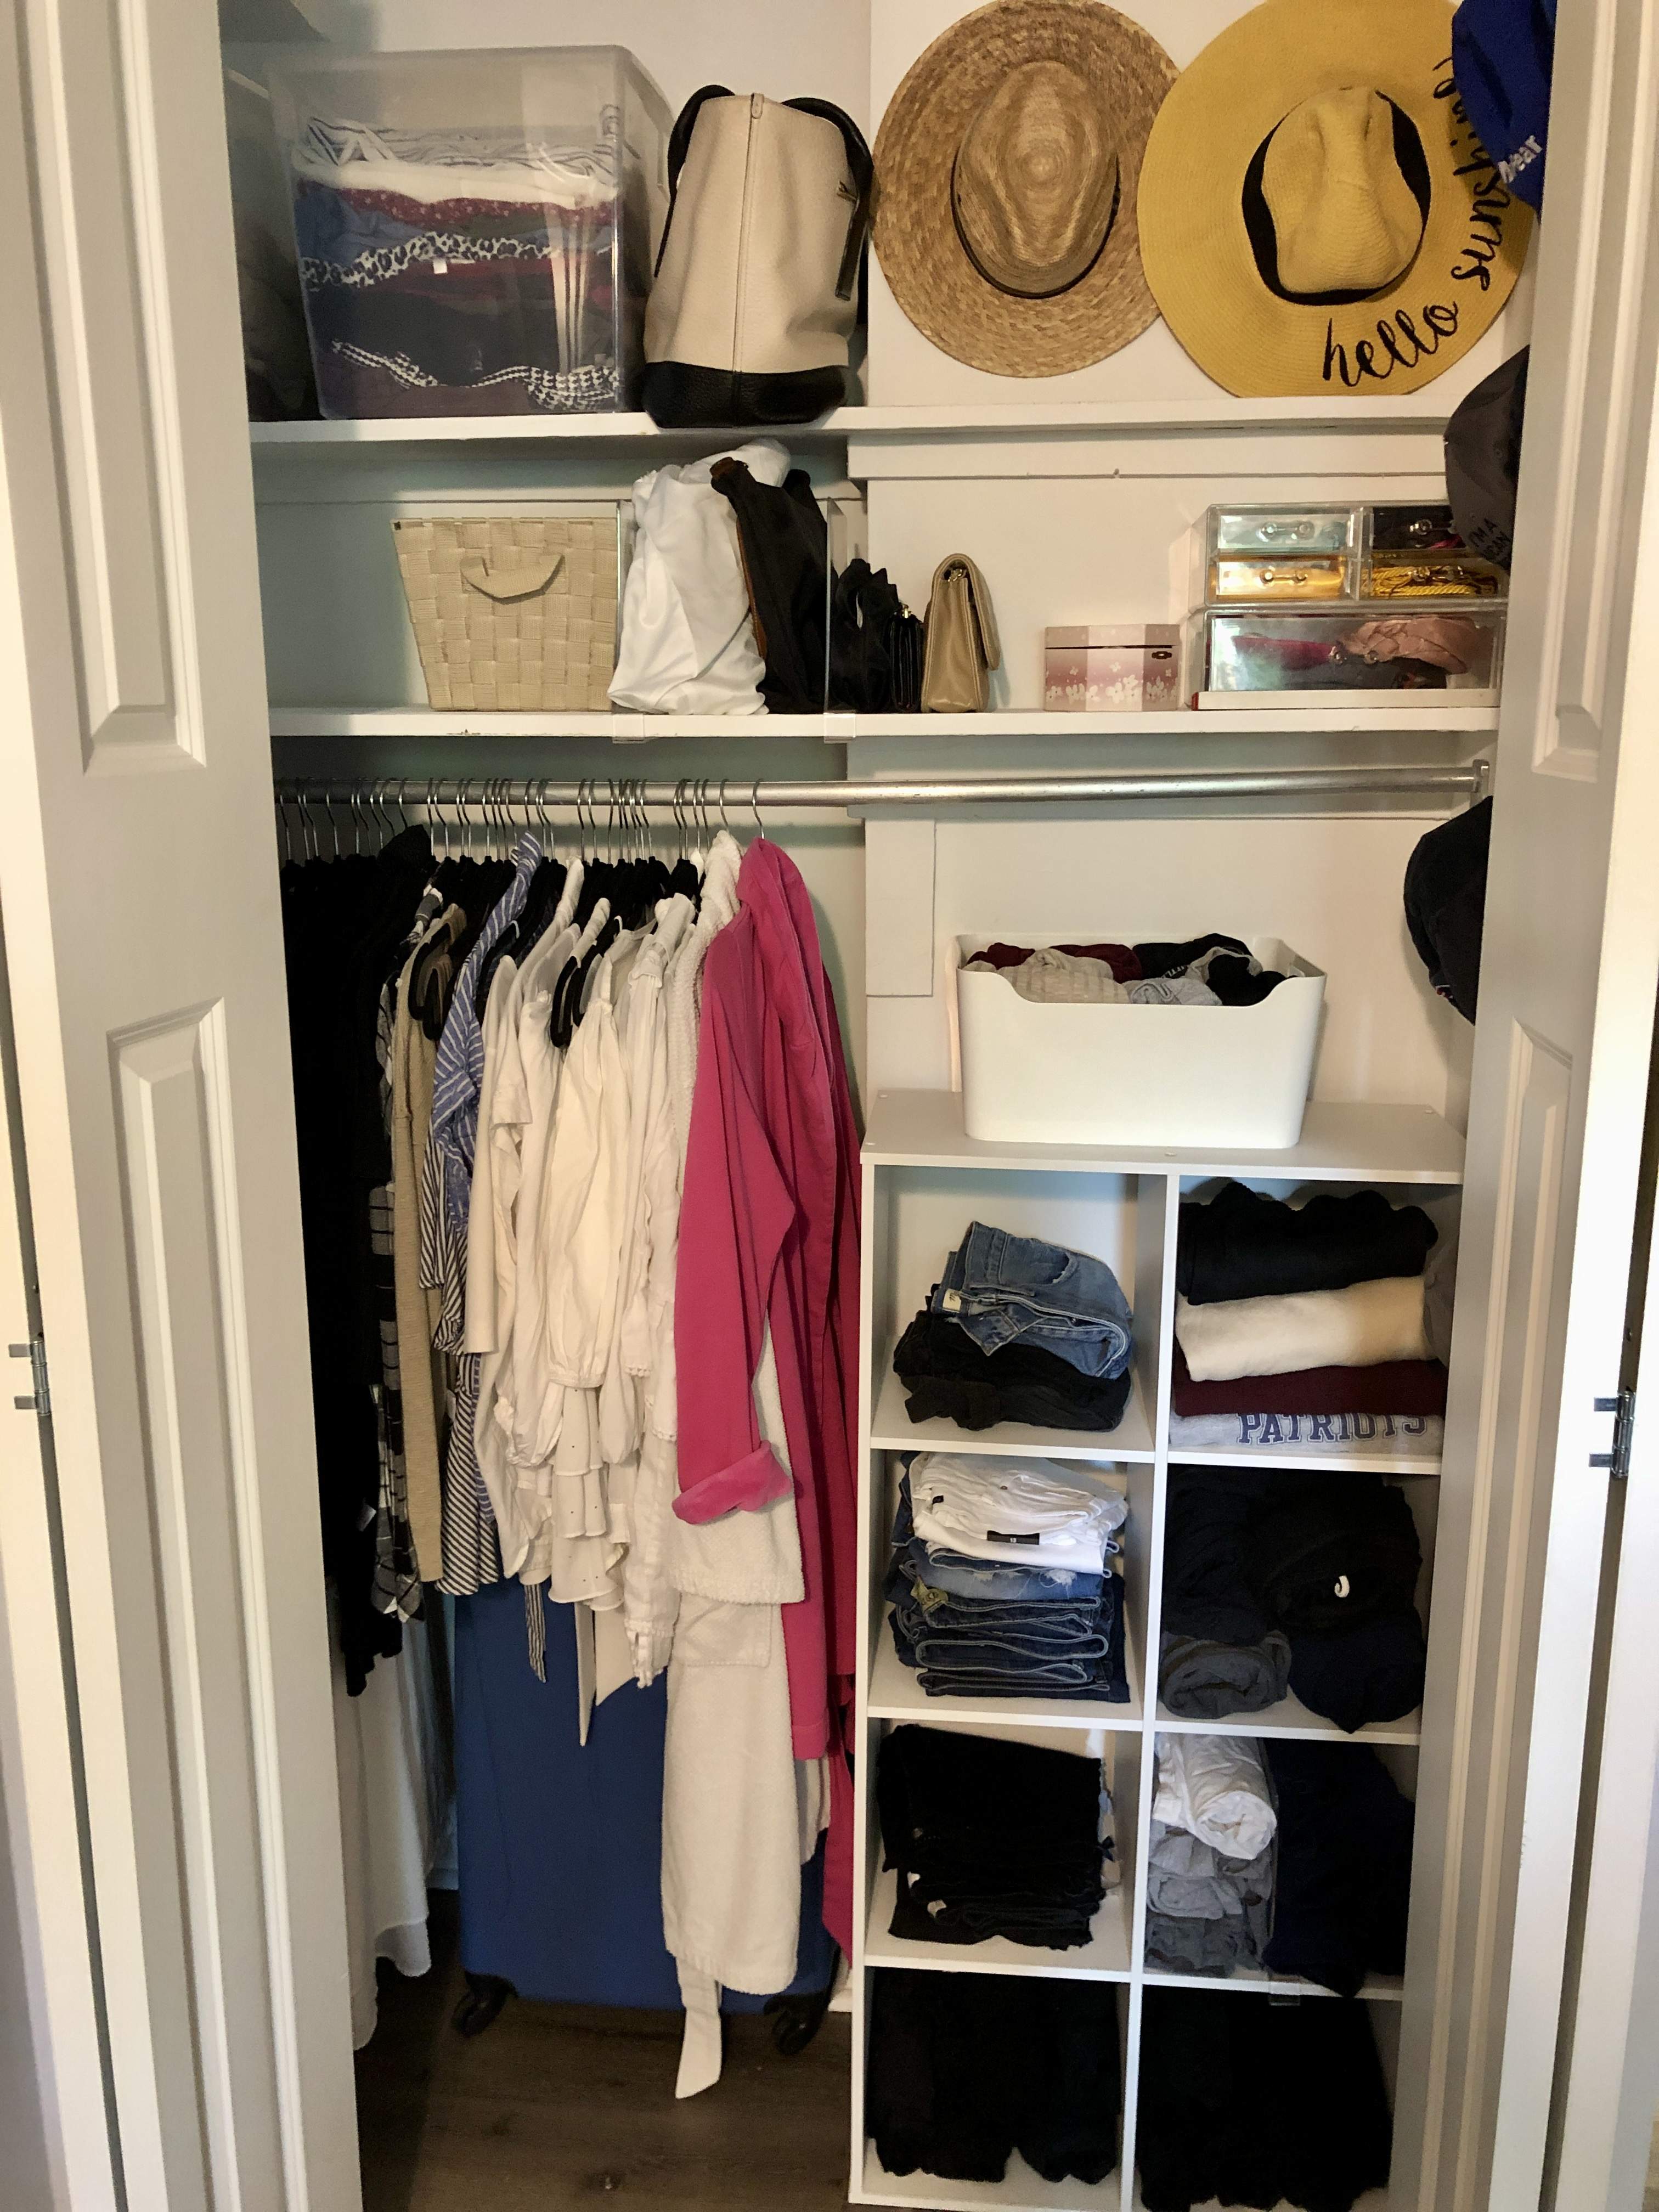 Organized closet with clothes categories and contained in a white cube unit; hanging clothes on matching black velvet hangers